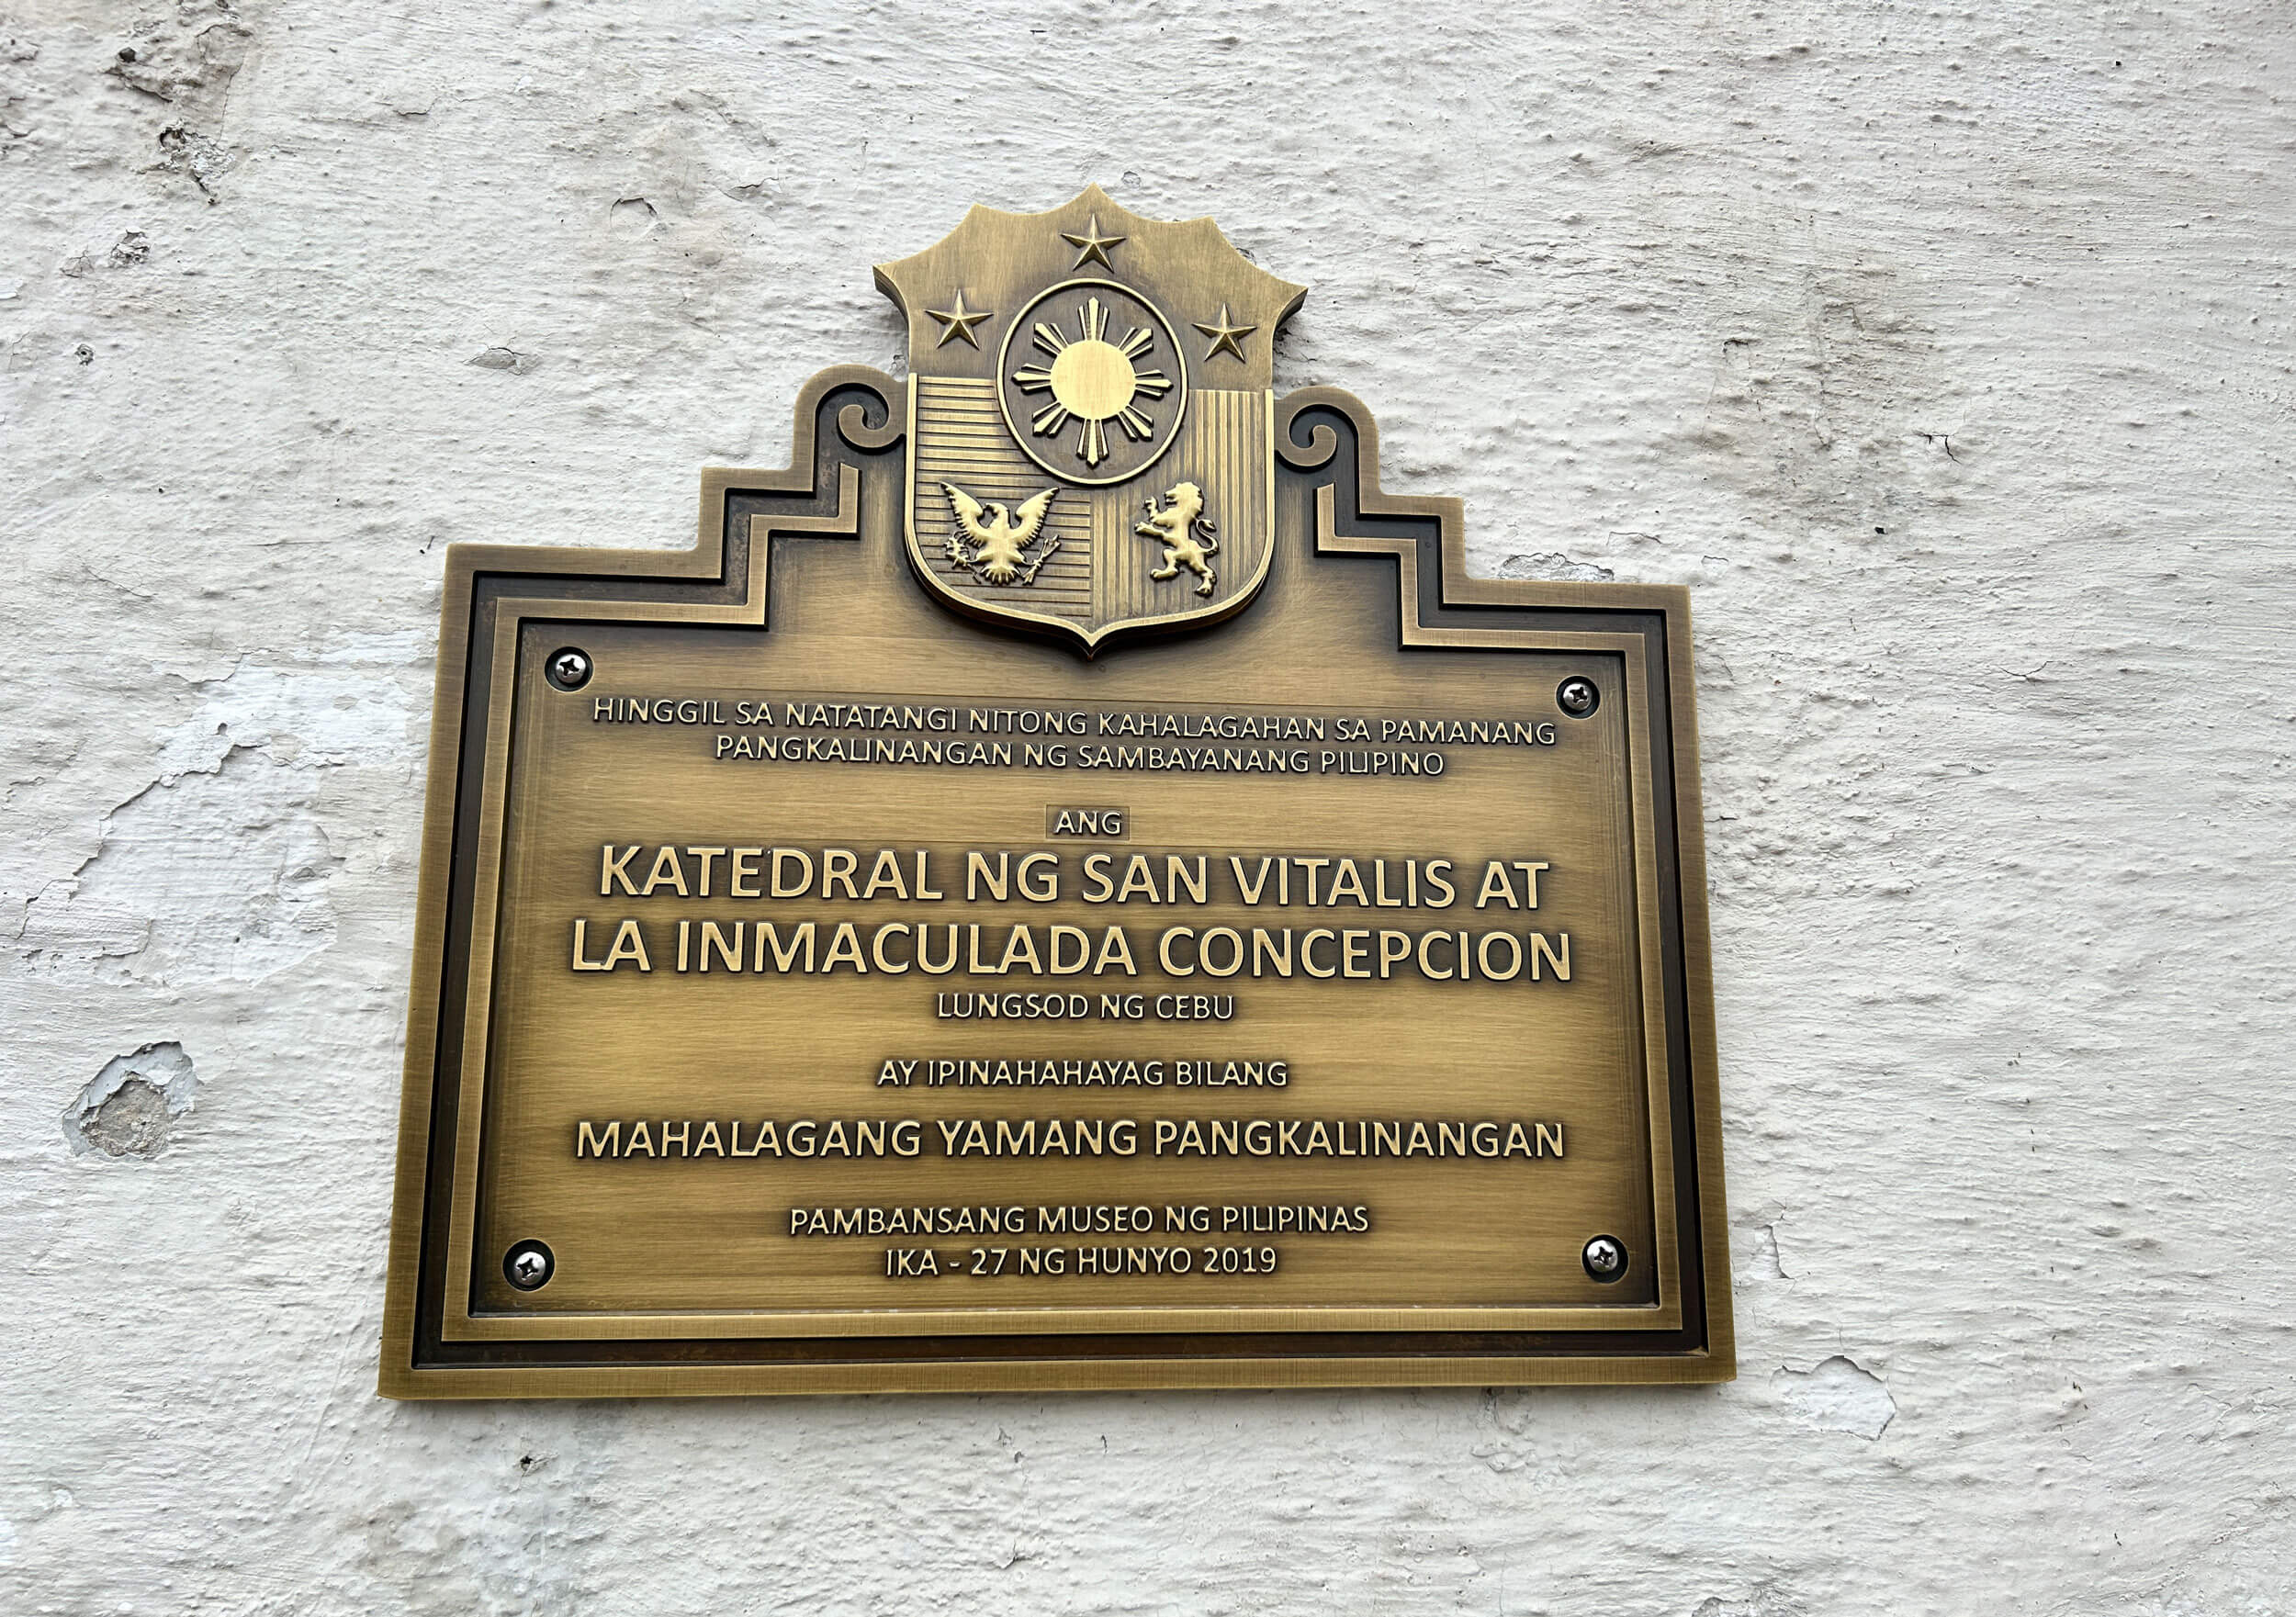 NEW NAME? Just last Saturday, the National Museum of the Philippines installed a marker recognizing the cathedral as an “Important Cultural Property.” The marker named the cathedral as “Katedral ng San Vitalis at La Inmaculada Conception.”  But in his 2019 paper, Cullinane said the cathedral “is known as the Metropolitan Cathedral and Parish of Saint Vitalis and the Guardian Angels (in Spanish: Catedral Metropolitana y Parroquia de San Vidal y los Ángeles Custodios).”